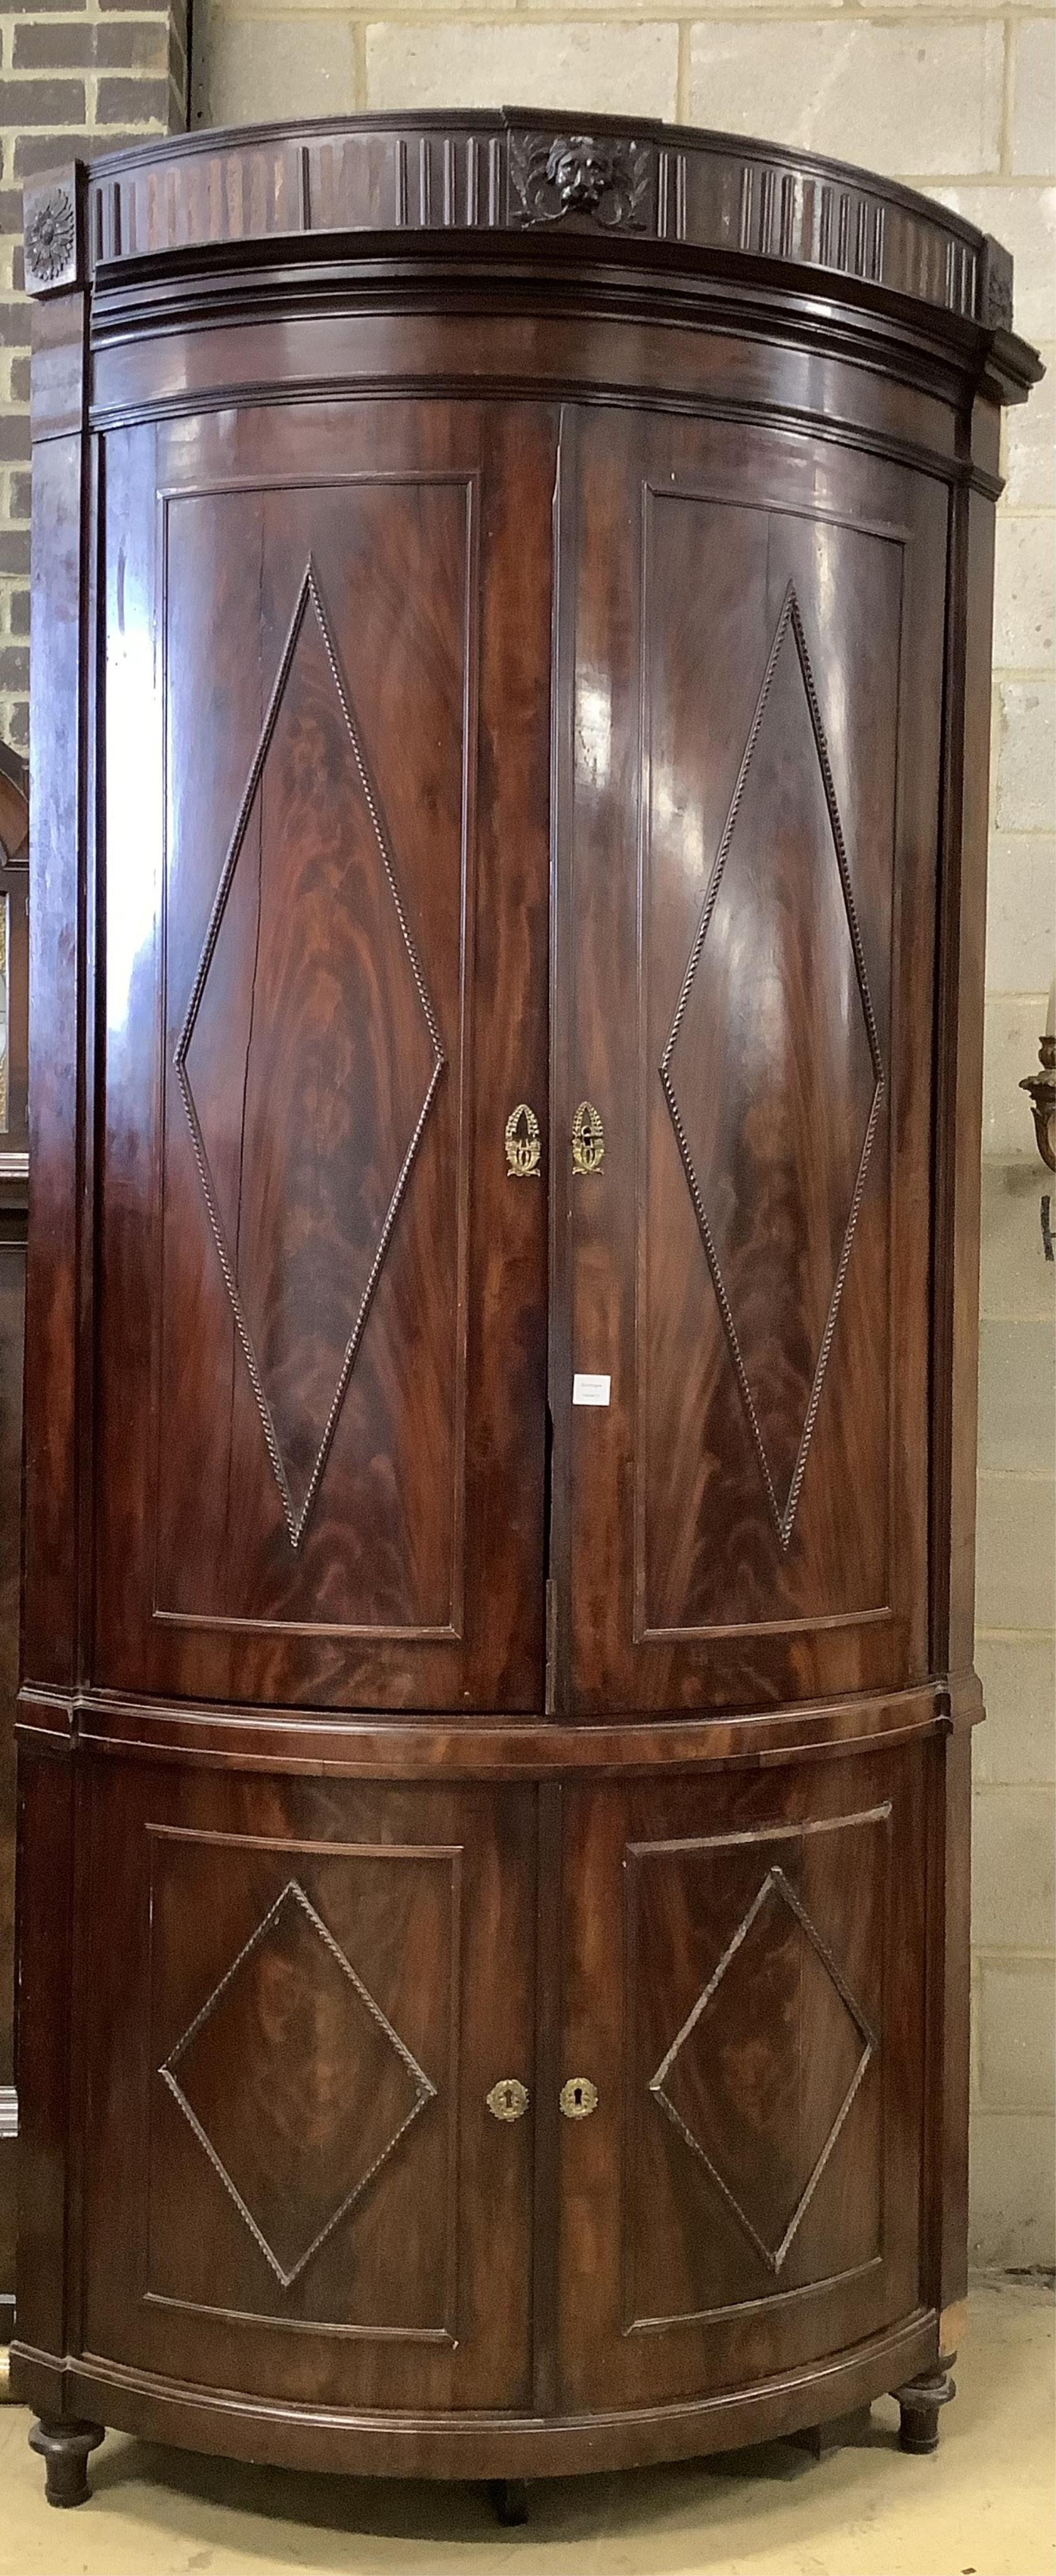 An unusually tall late 18th century Dutch mahogany bow fronted corner cabinet, in two sections, width 130cm, depth 82cm, height 265cm. Condition - fair